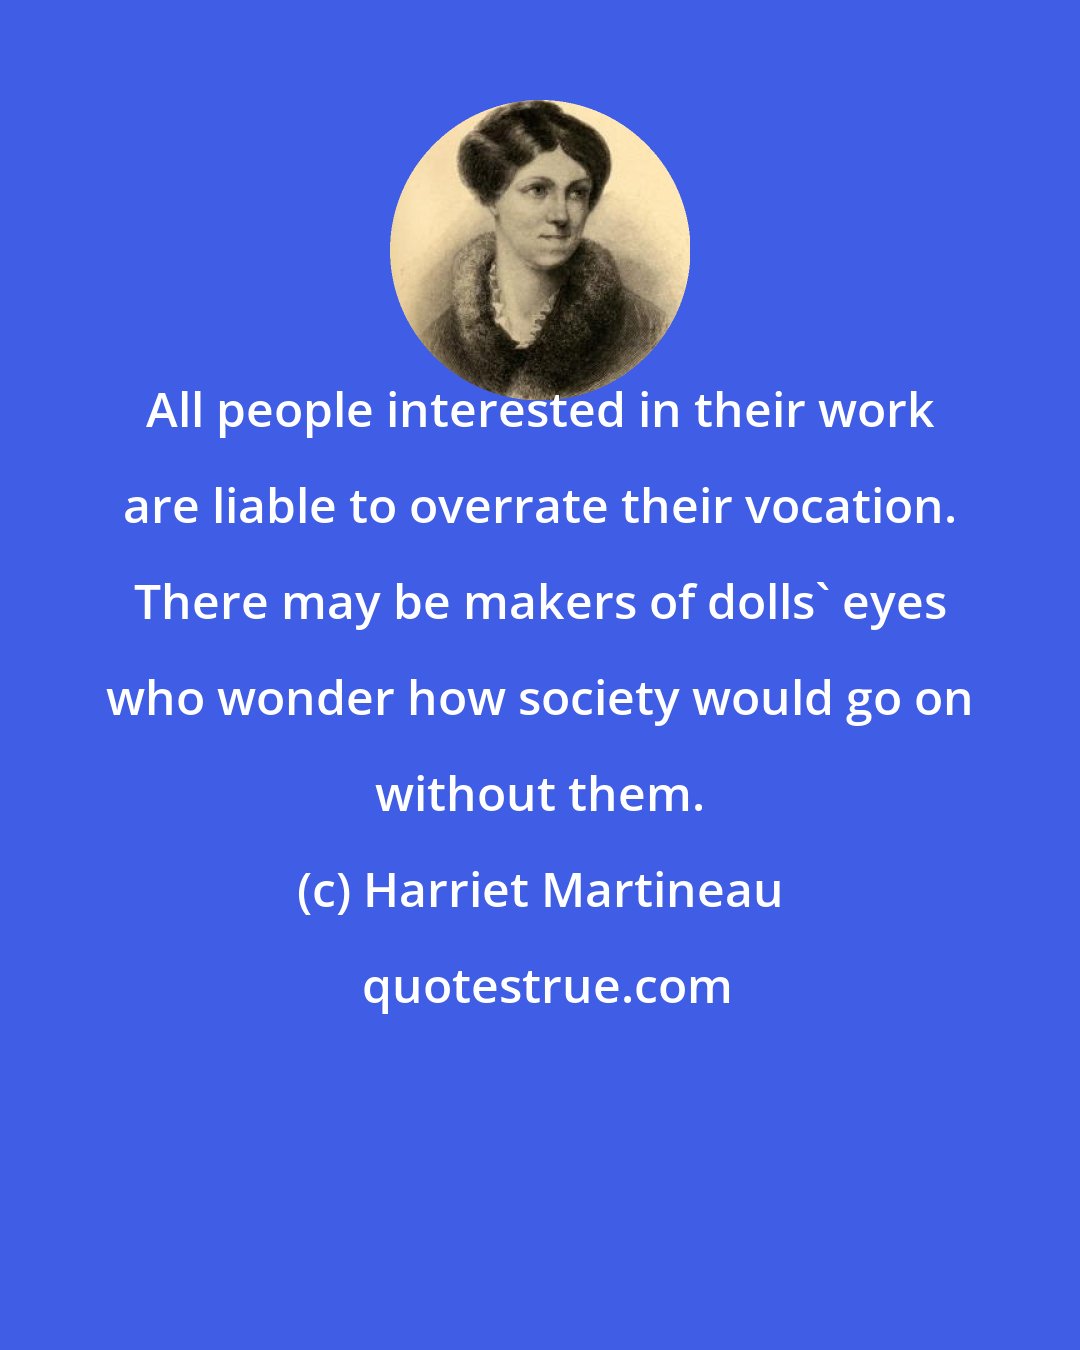 Harriet Martineau: All people interested in their work are liable to overrate their vocation. There may be makers of dolls' eyes who wonder how society would go on without them.